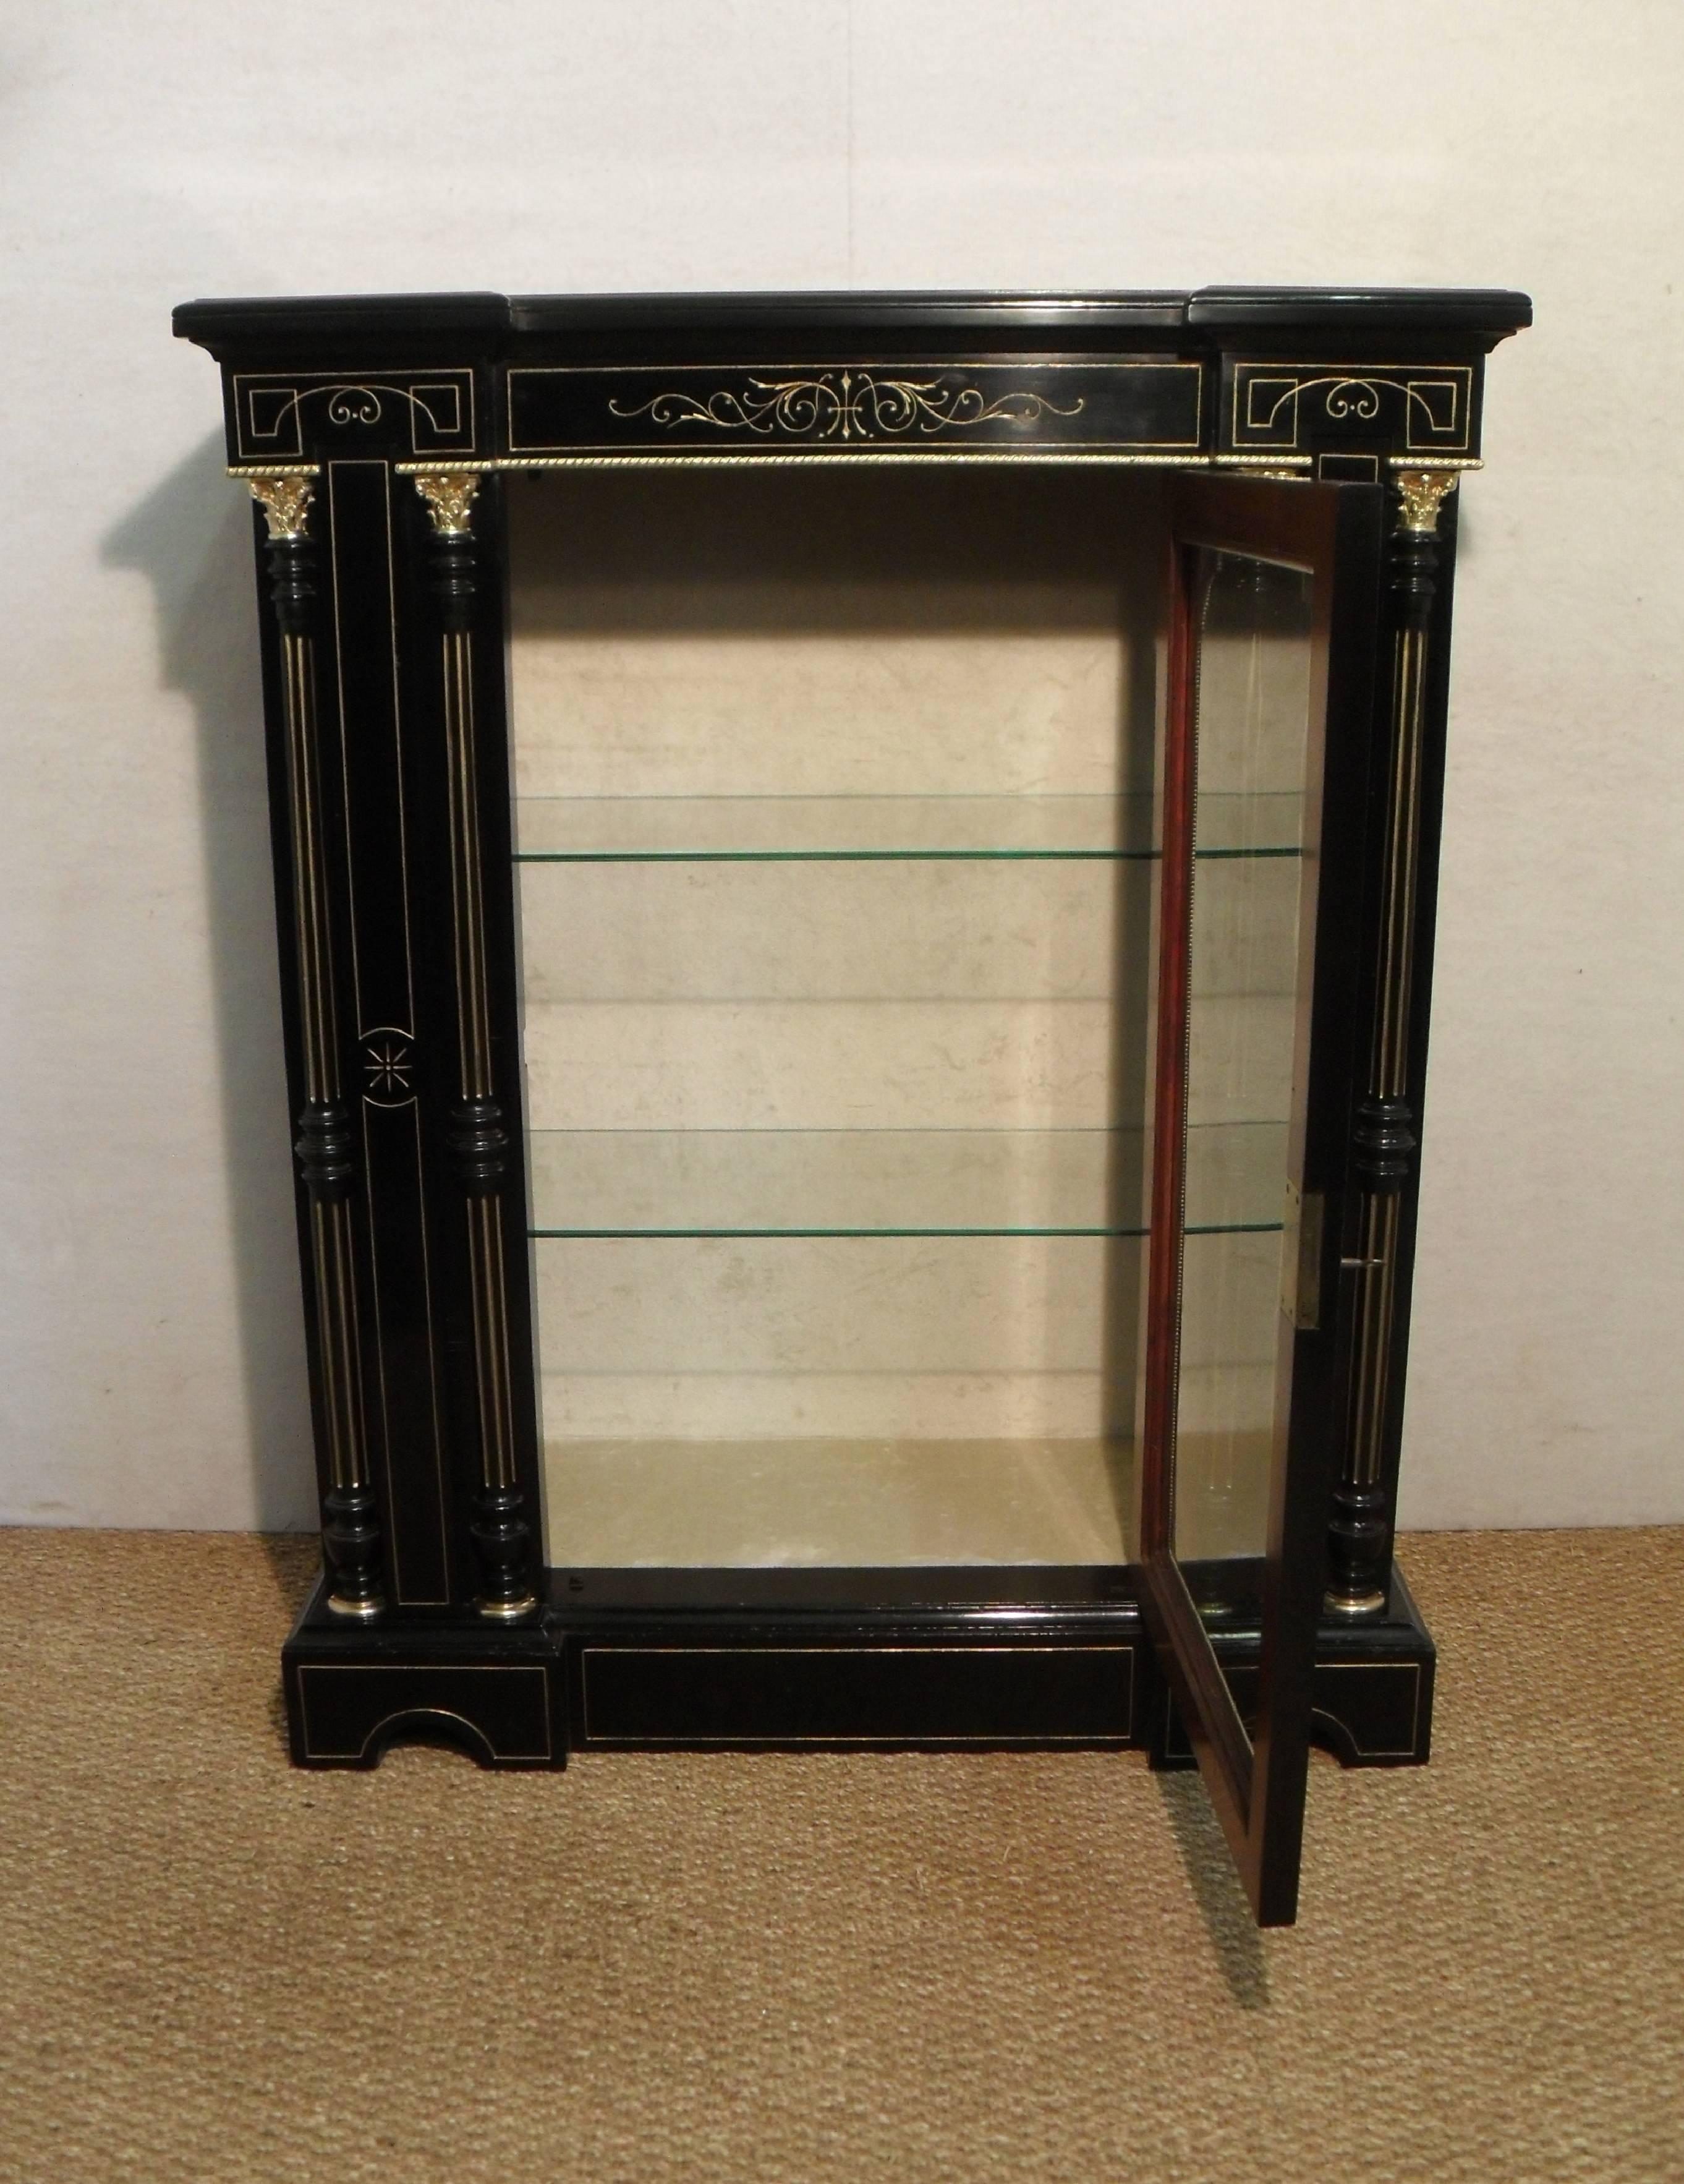 19th Century Pair of Victorian Aesthetic Movement Ebonized Display Cabinets or Bookcases